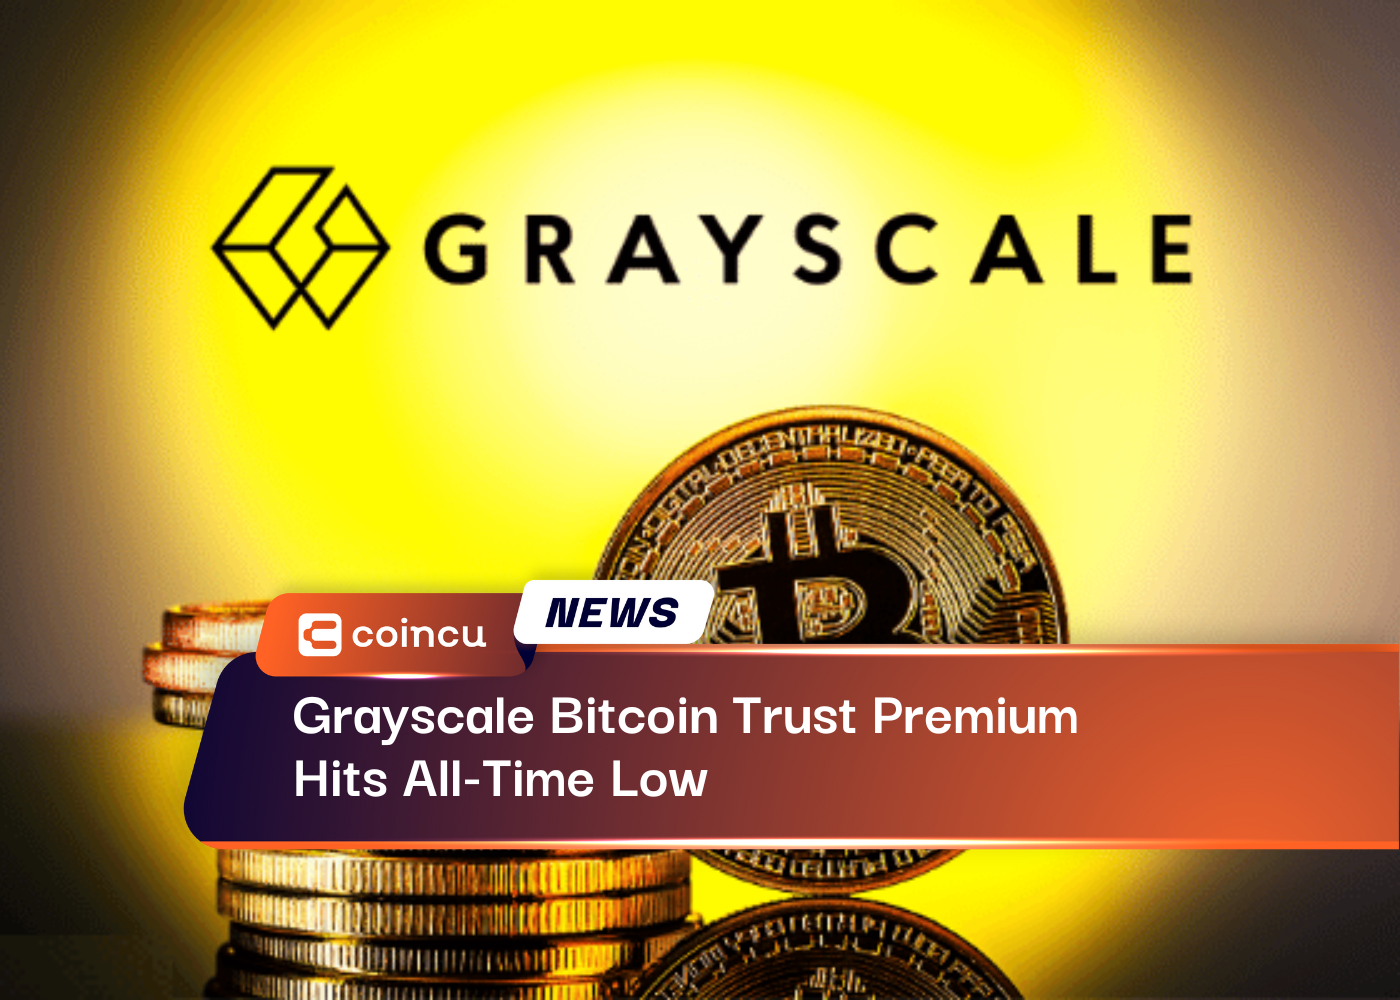 Grayscale Bitcoin Trust Premium Hits All-Time Low